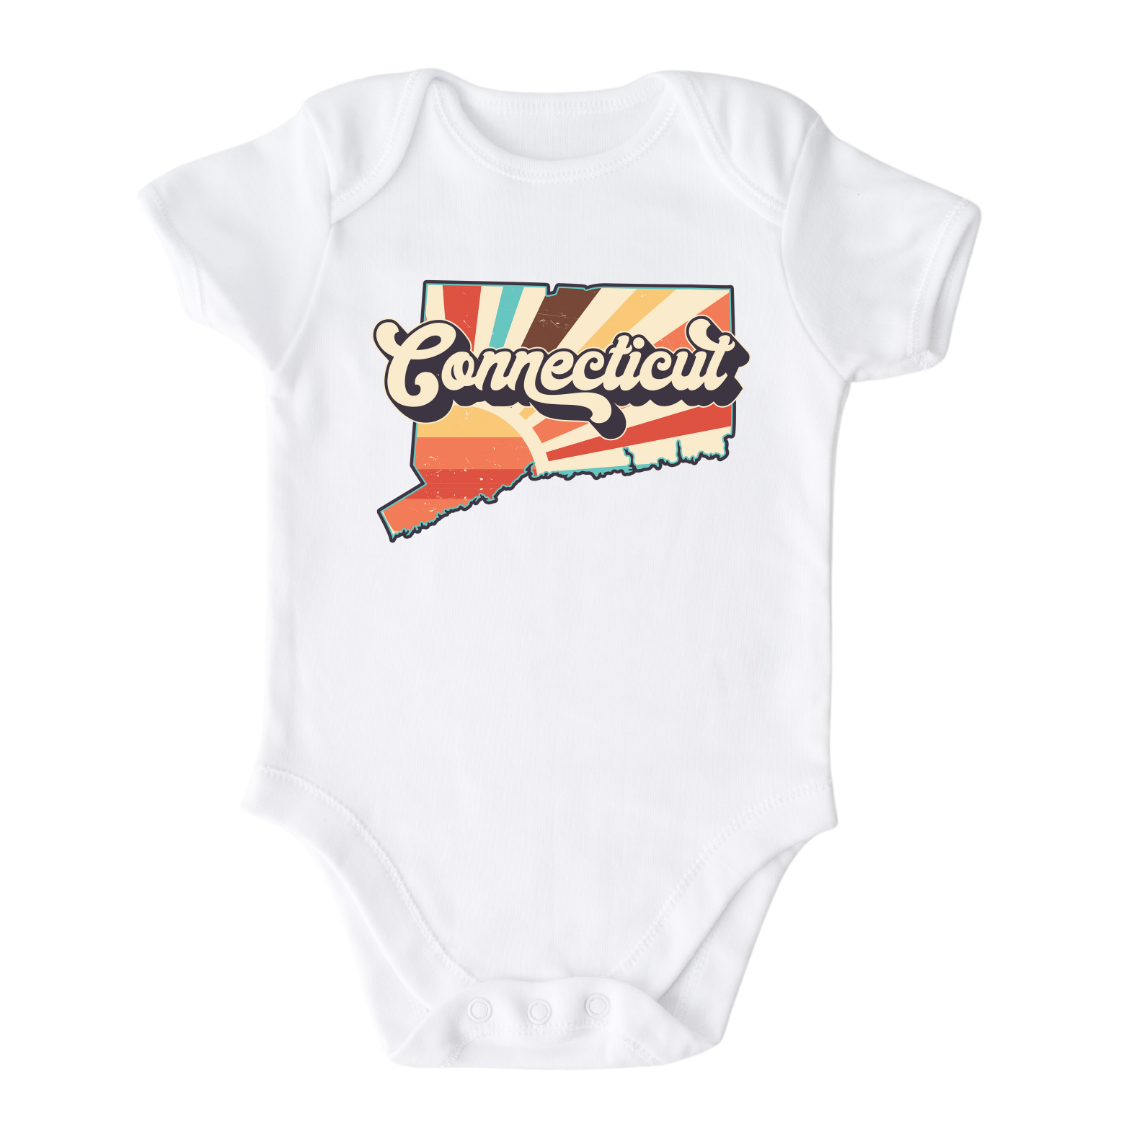 Connecticut retro design printed on baby bodysuit in white color, front image view